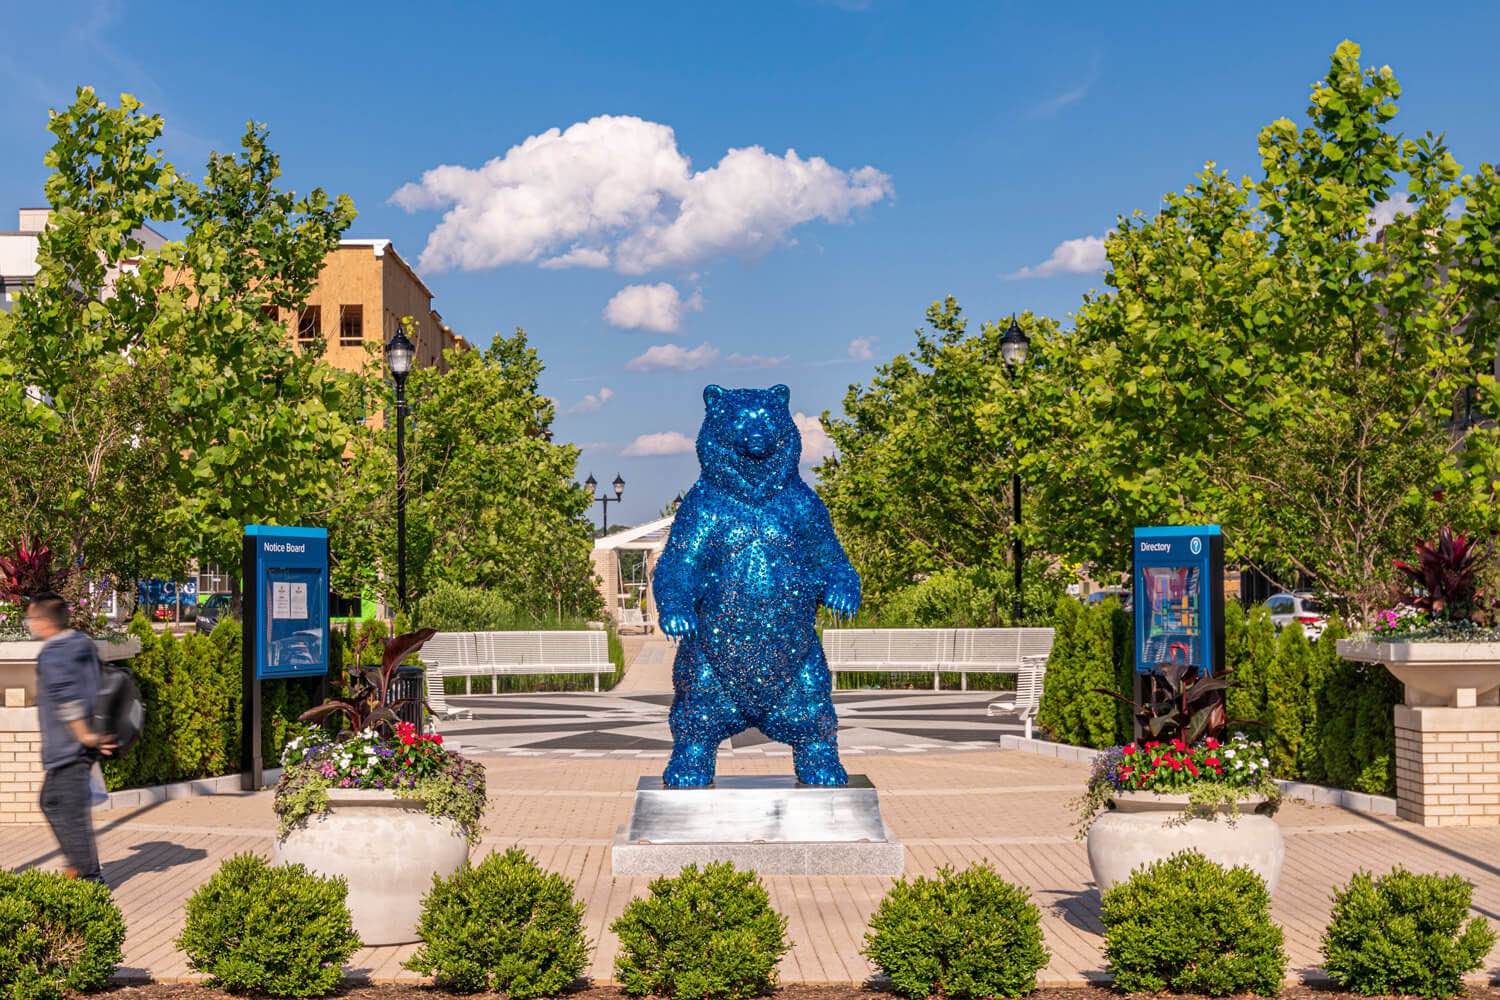 Sir Rulean the bear welcomes you to Riverdale Park!